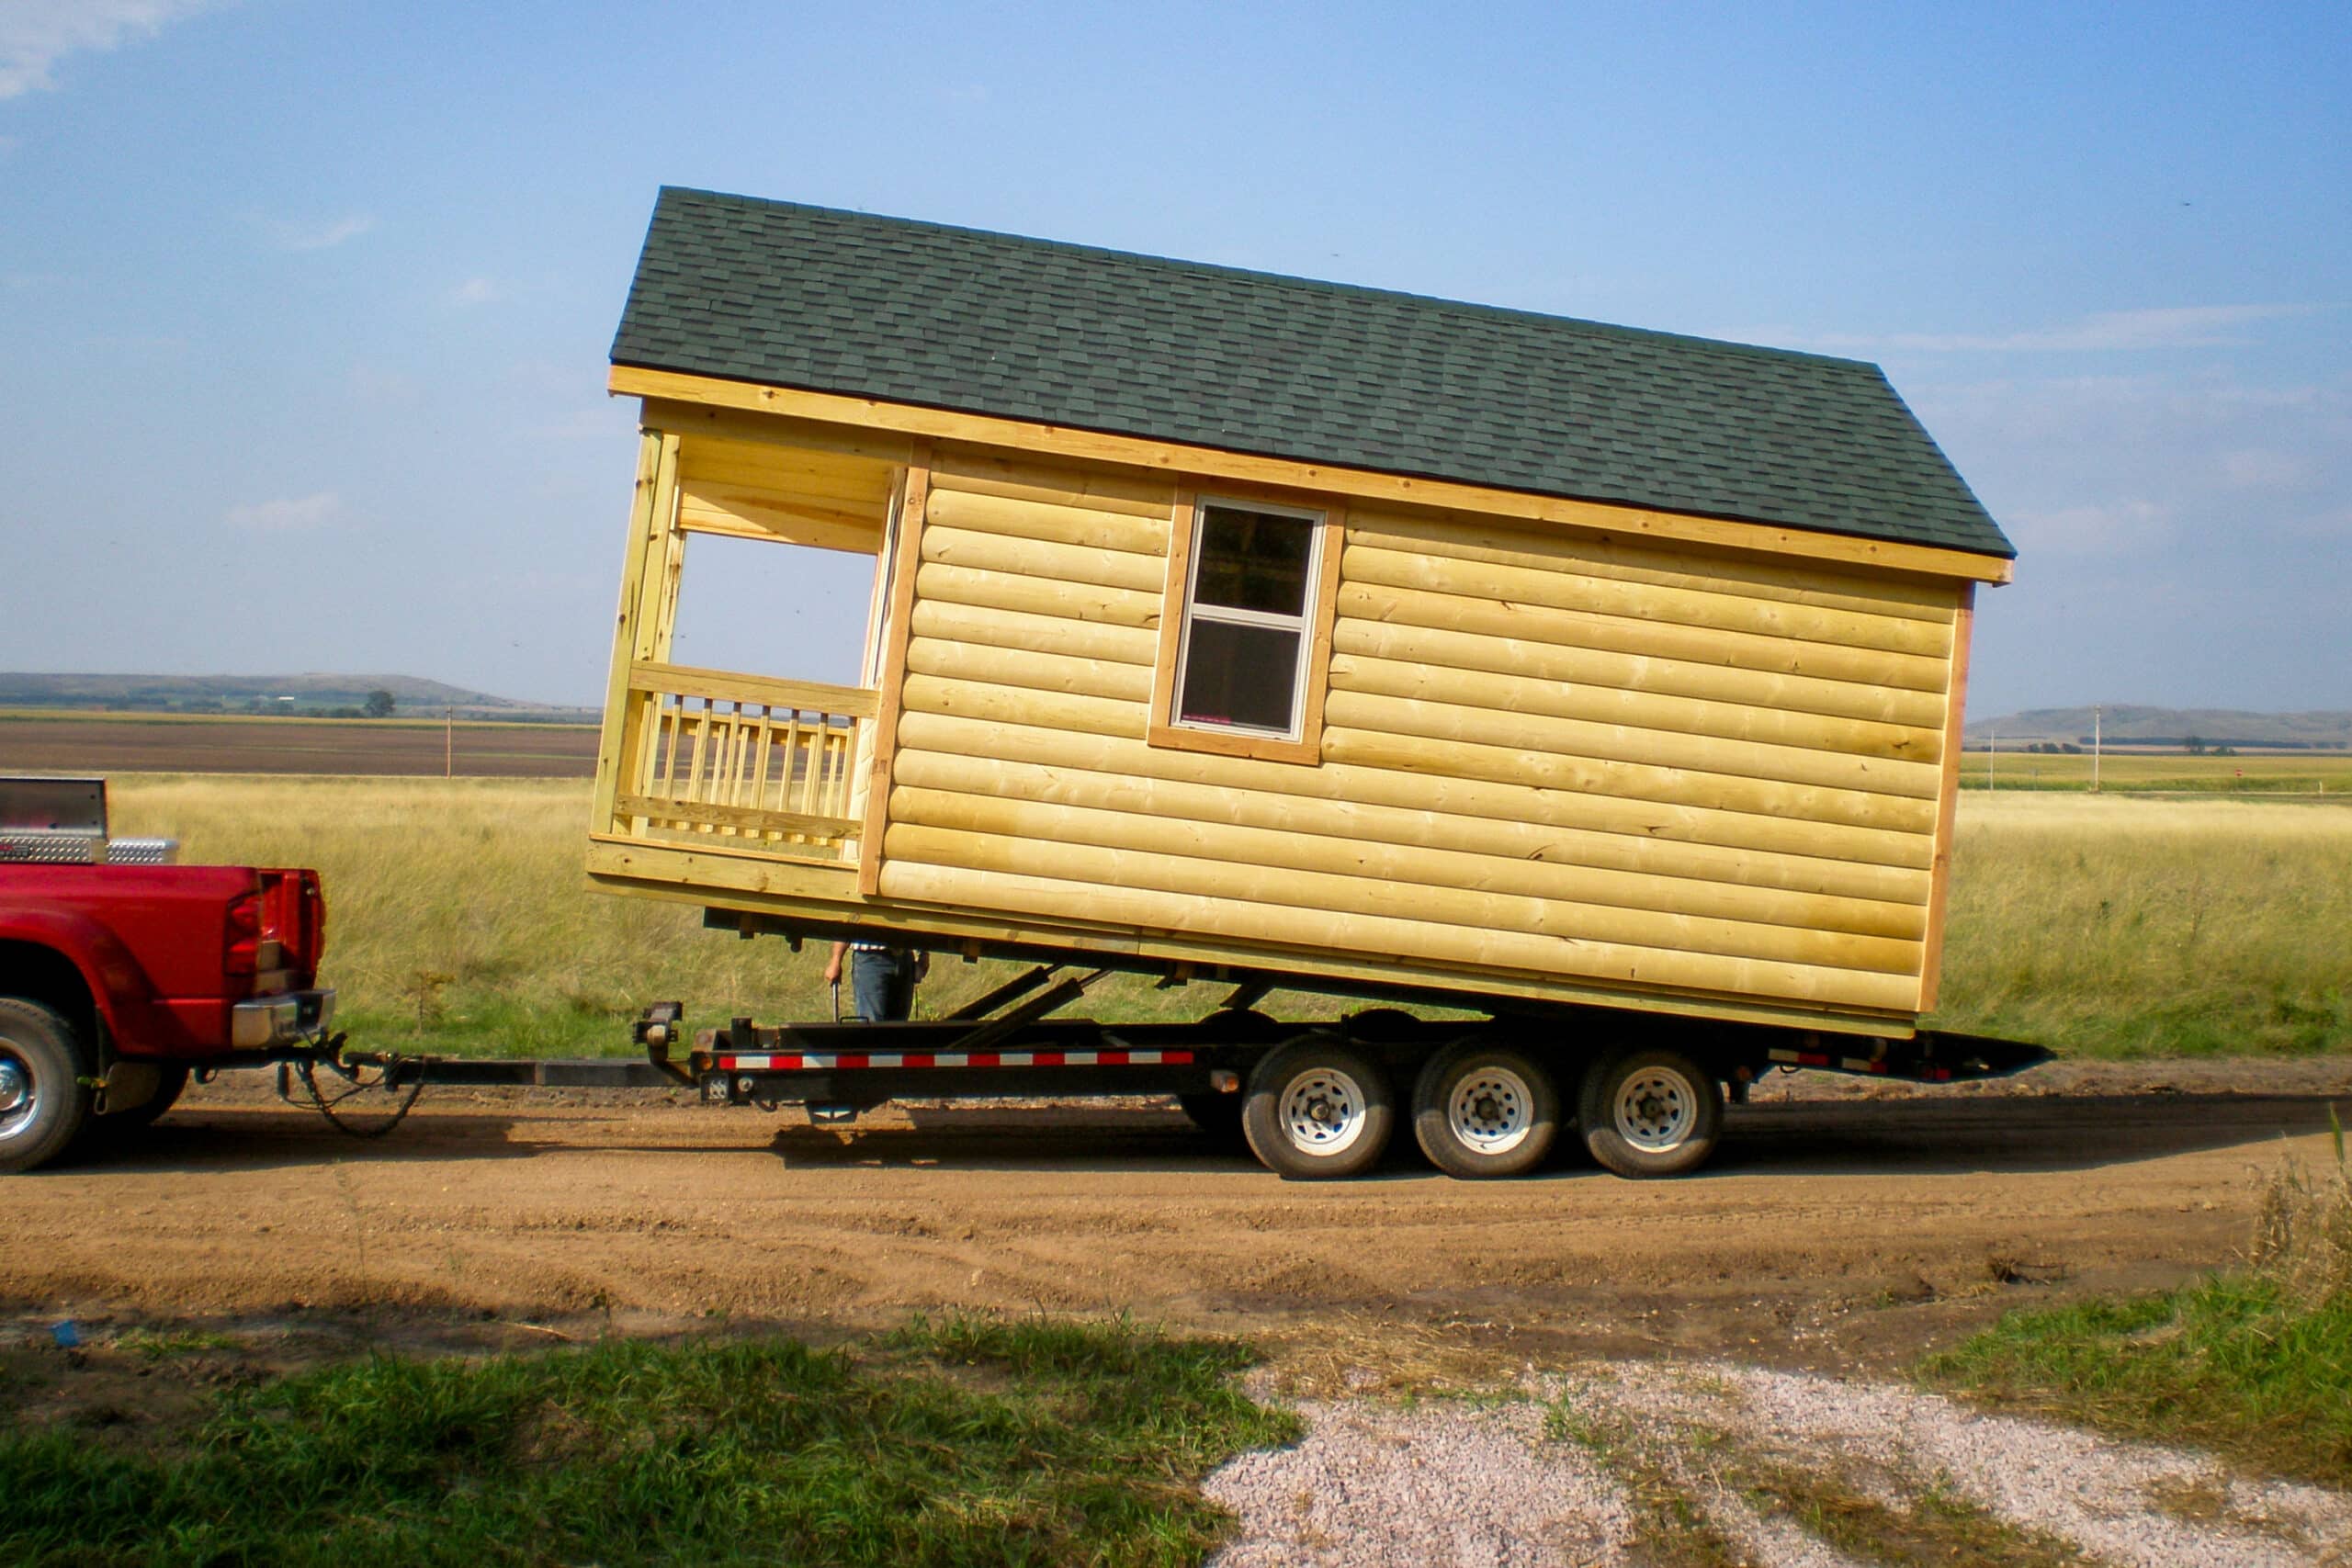 Cabin storage shed on a truck